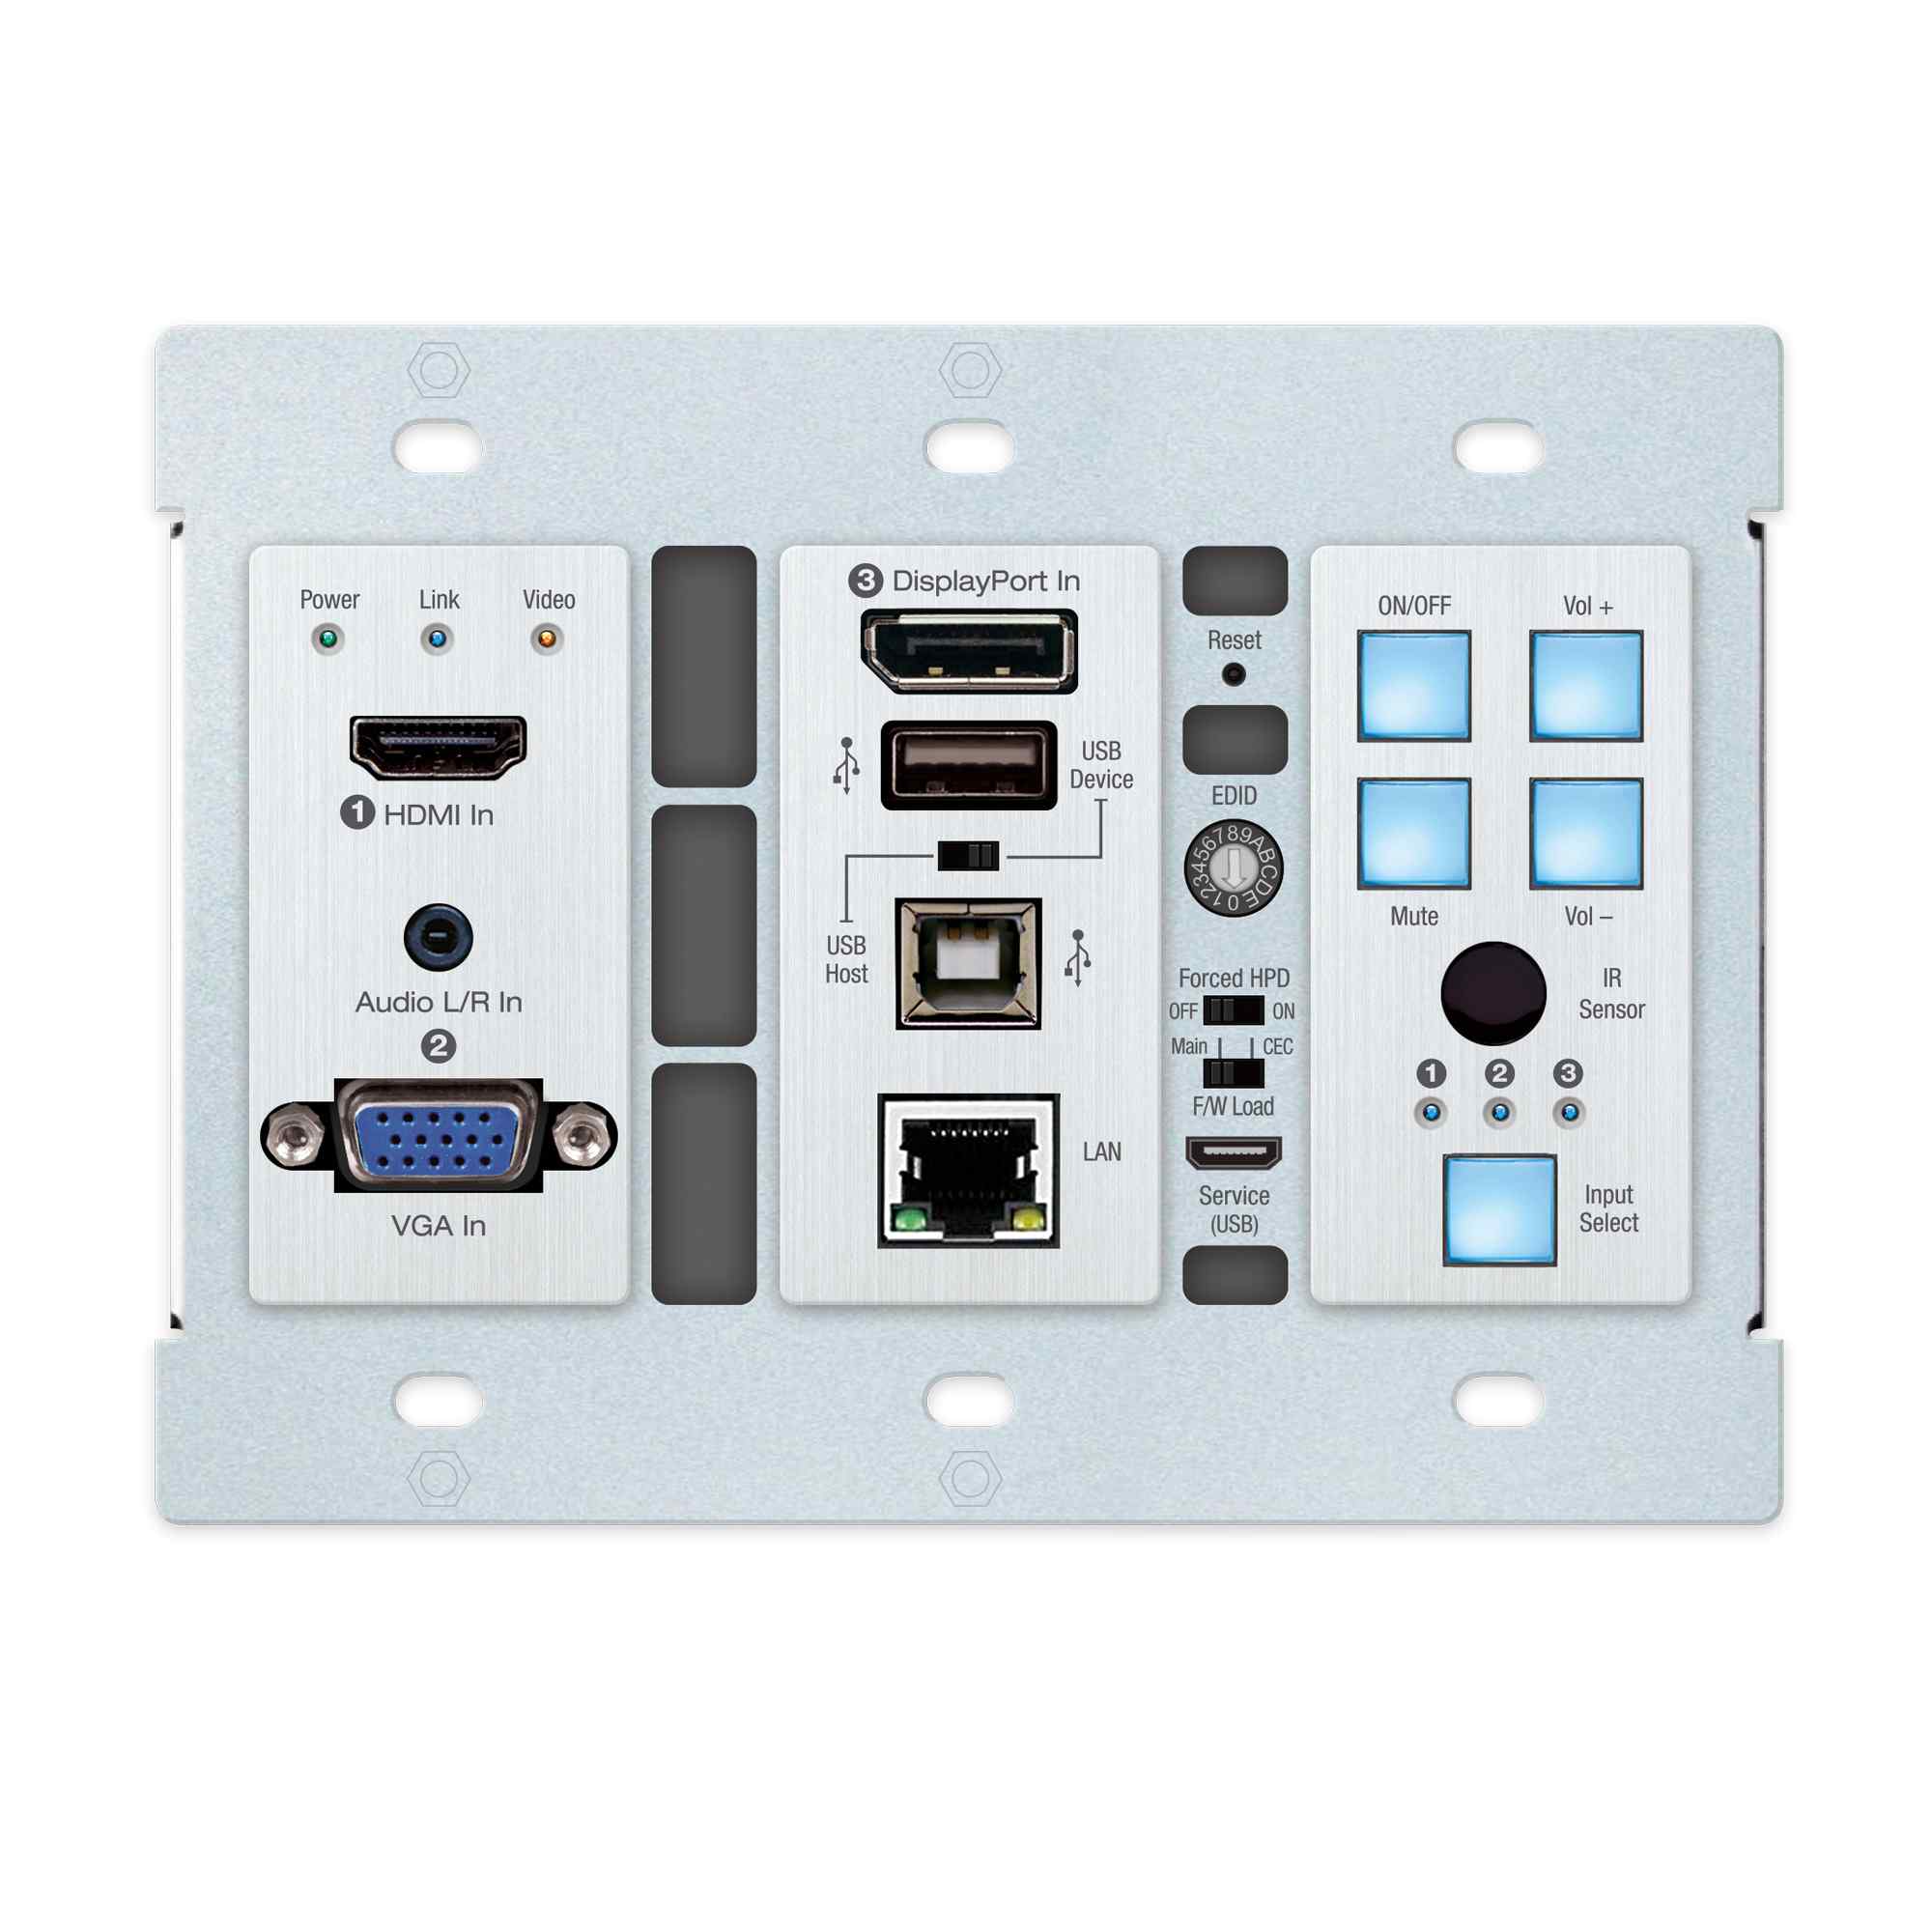 Thumbnail of hdbaset transmitter front chassis